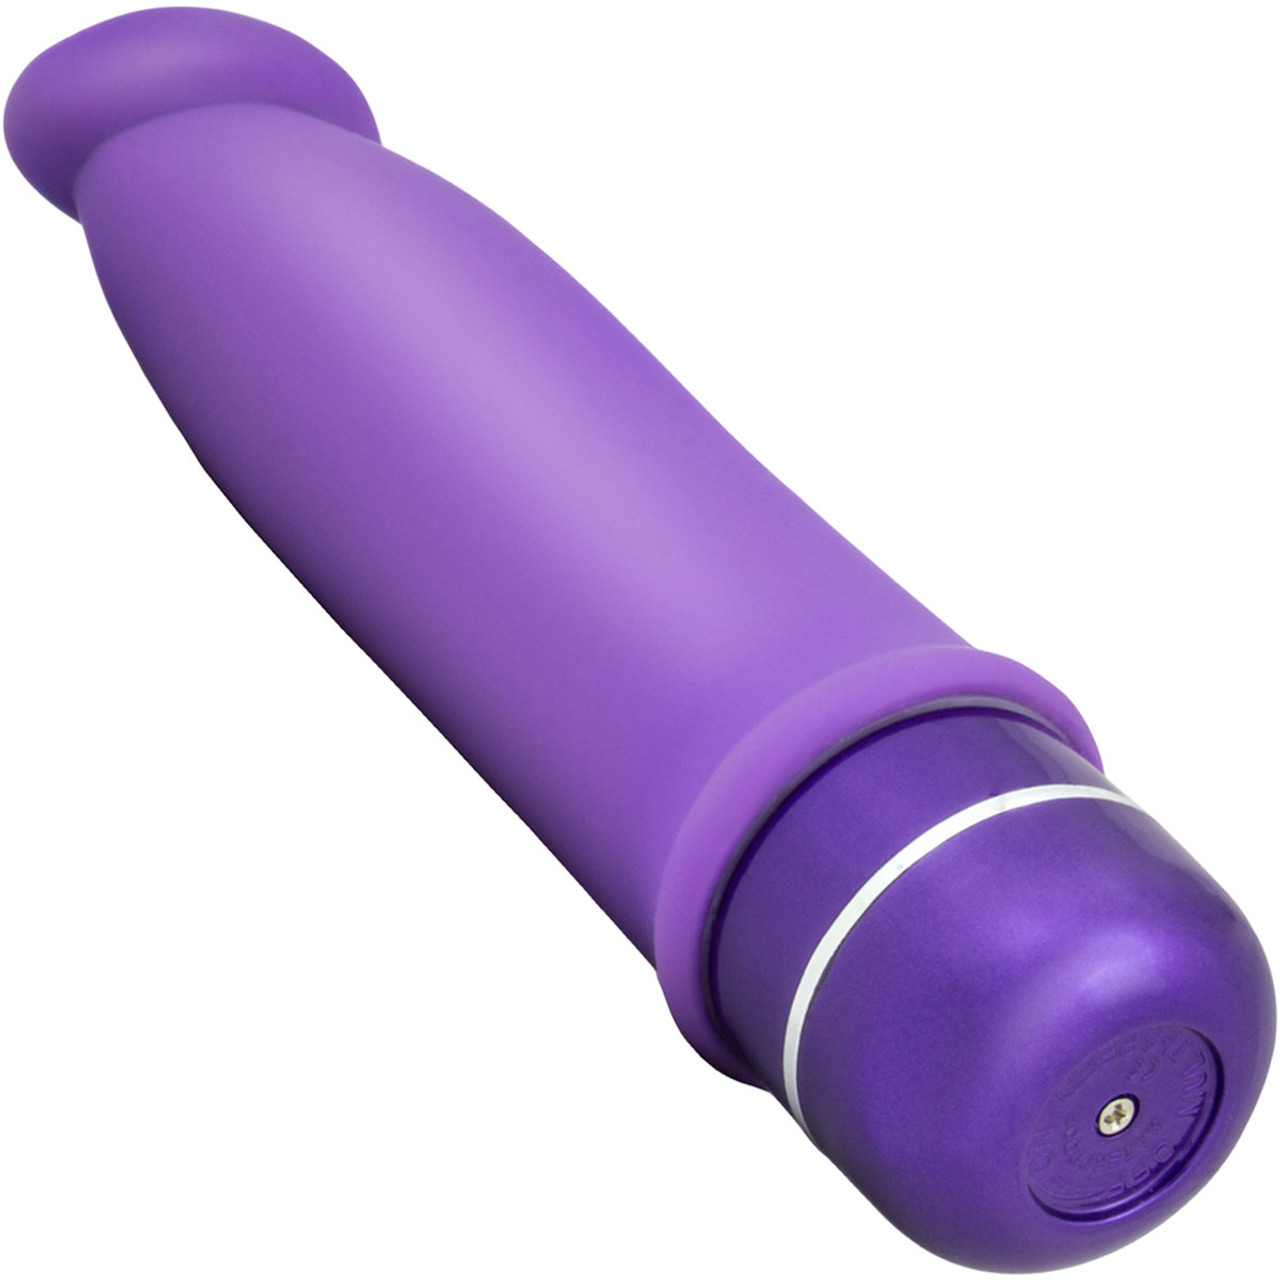 Luxe Purity Silicone Vibrator by Blush Novelties